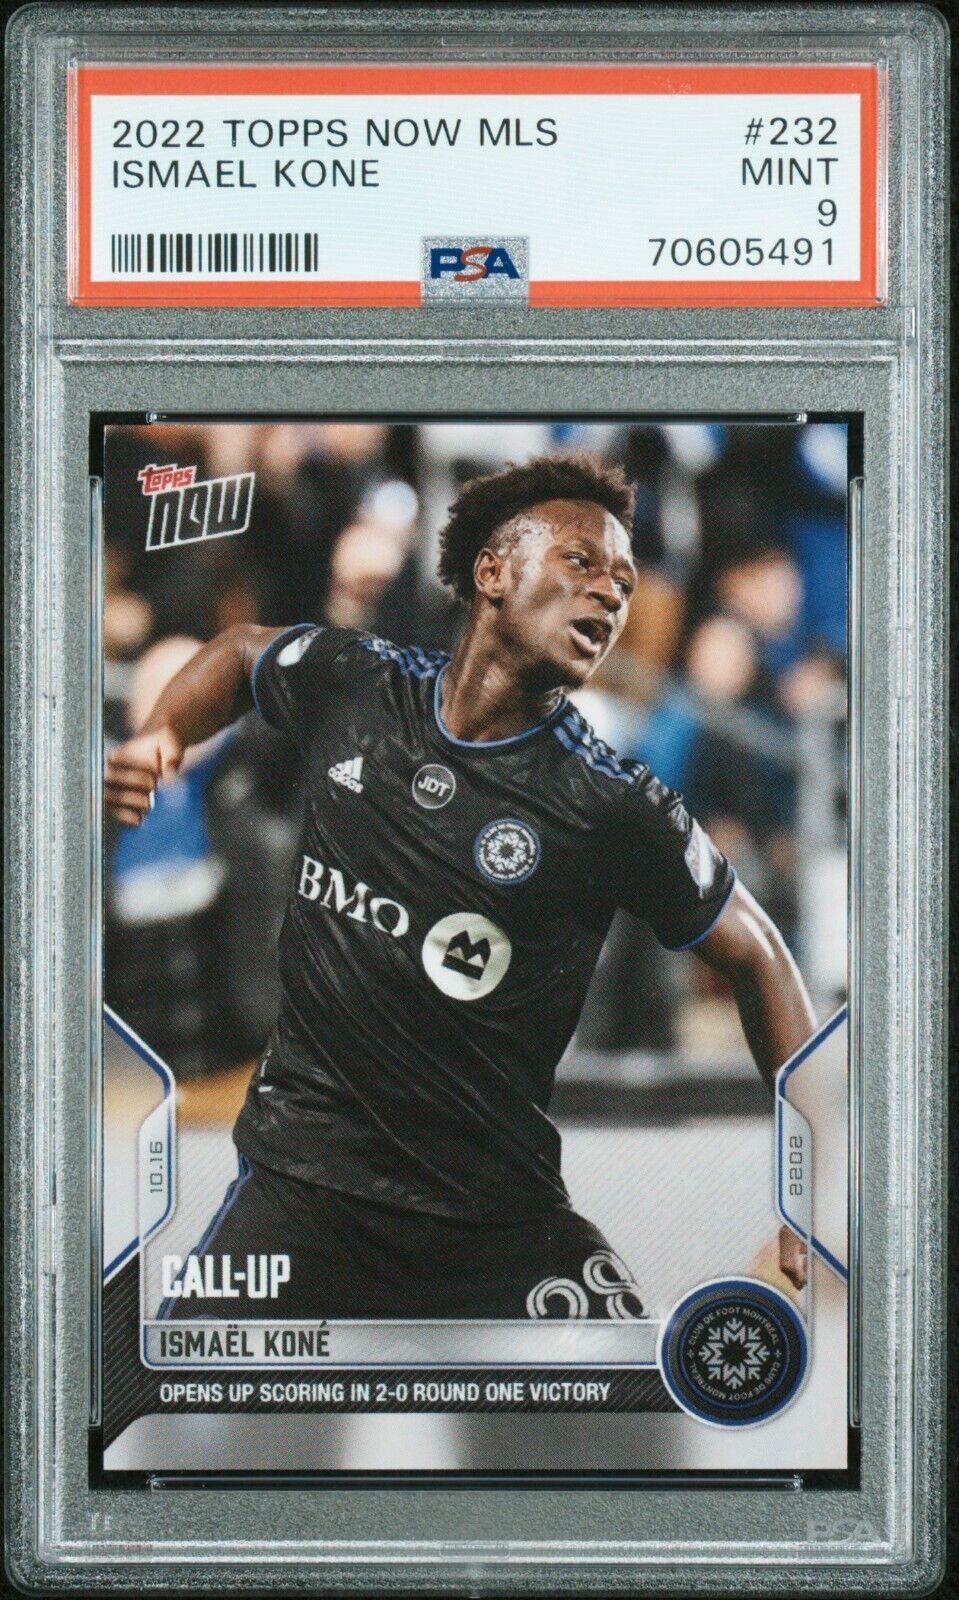 2022 Topps Now MLS Soccer #232 Ismael Kone Rookie Card RC PSA 9 - 643-collectibles